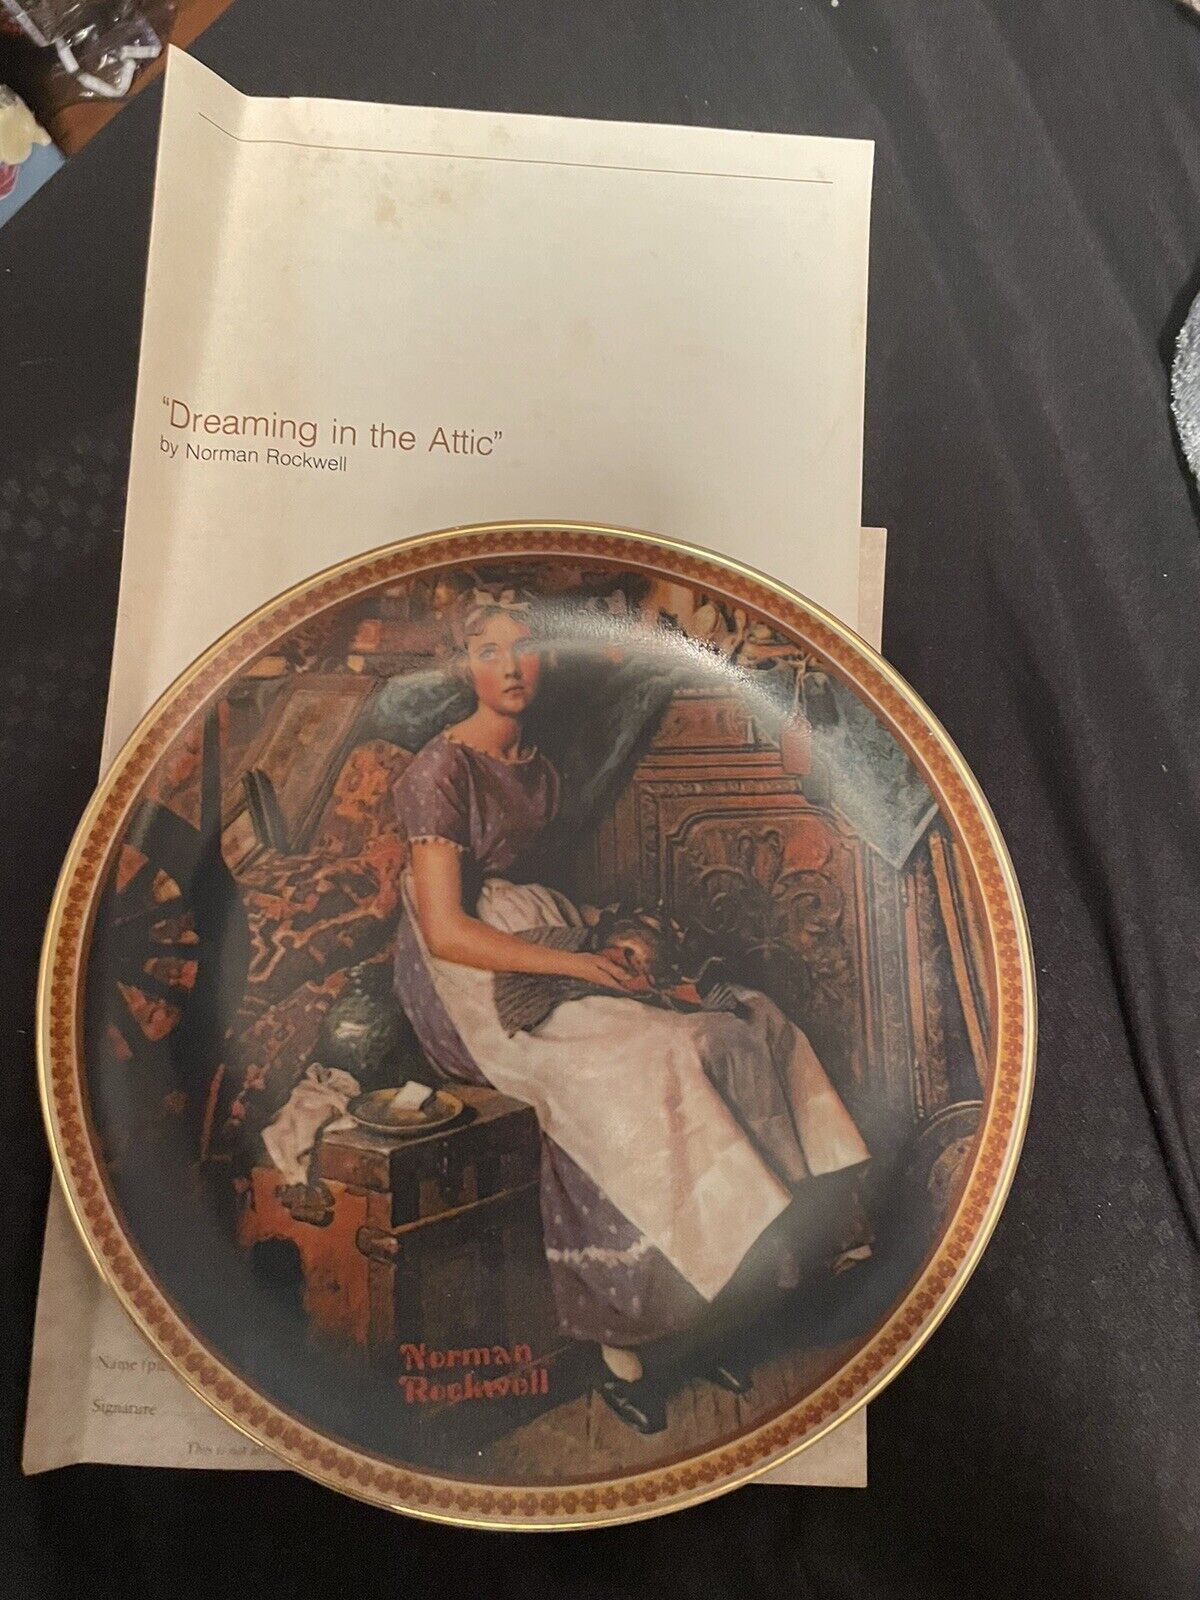 Edwin M Knowles China Co “Dreaming in the Attic” Norman Rockwell Collector Plate